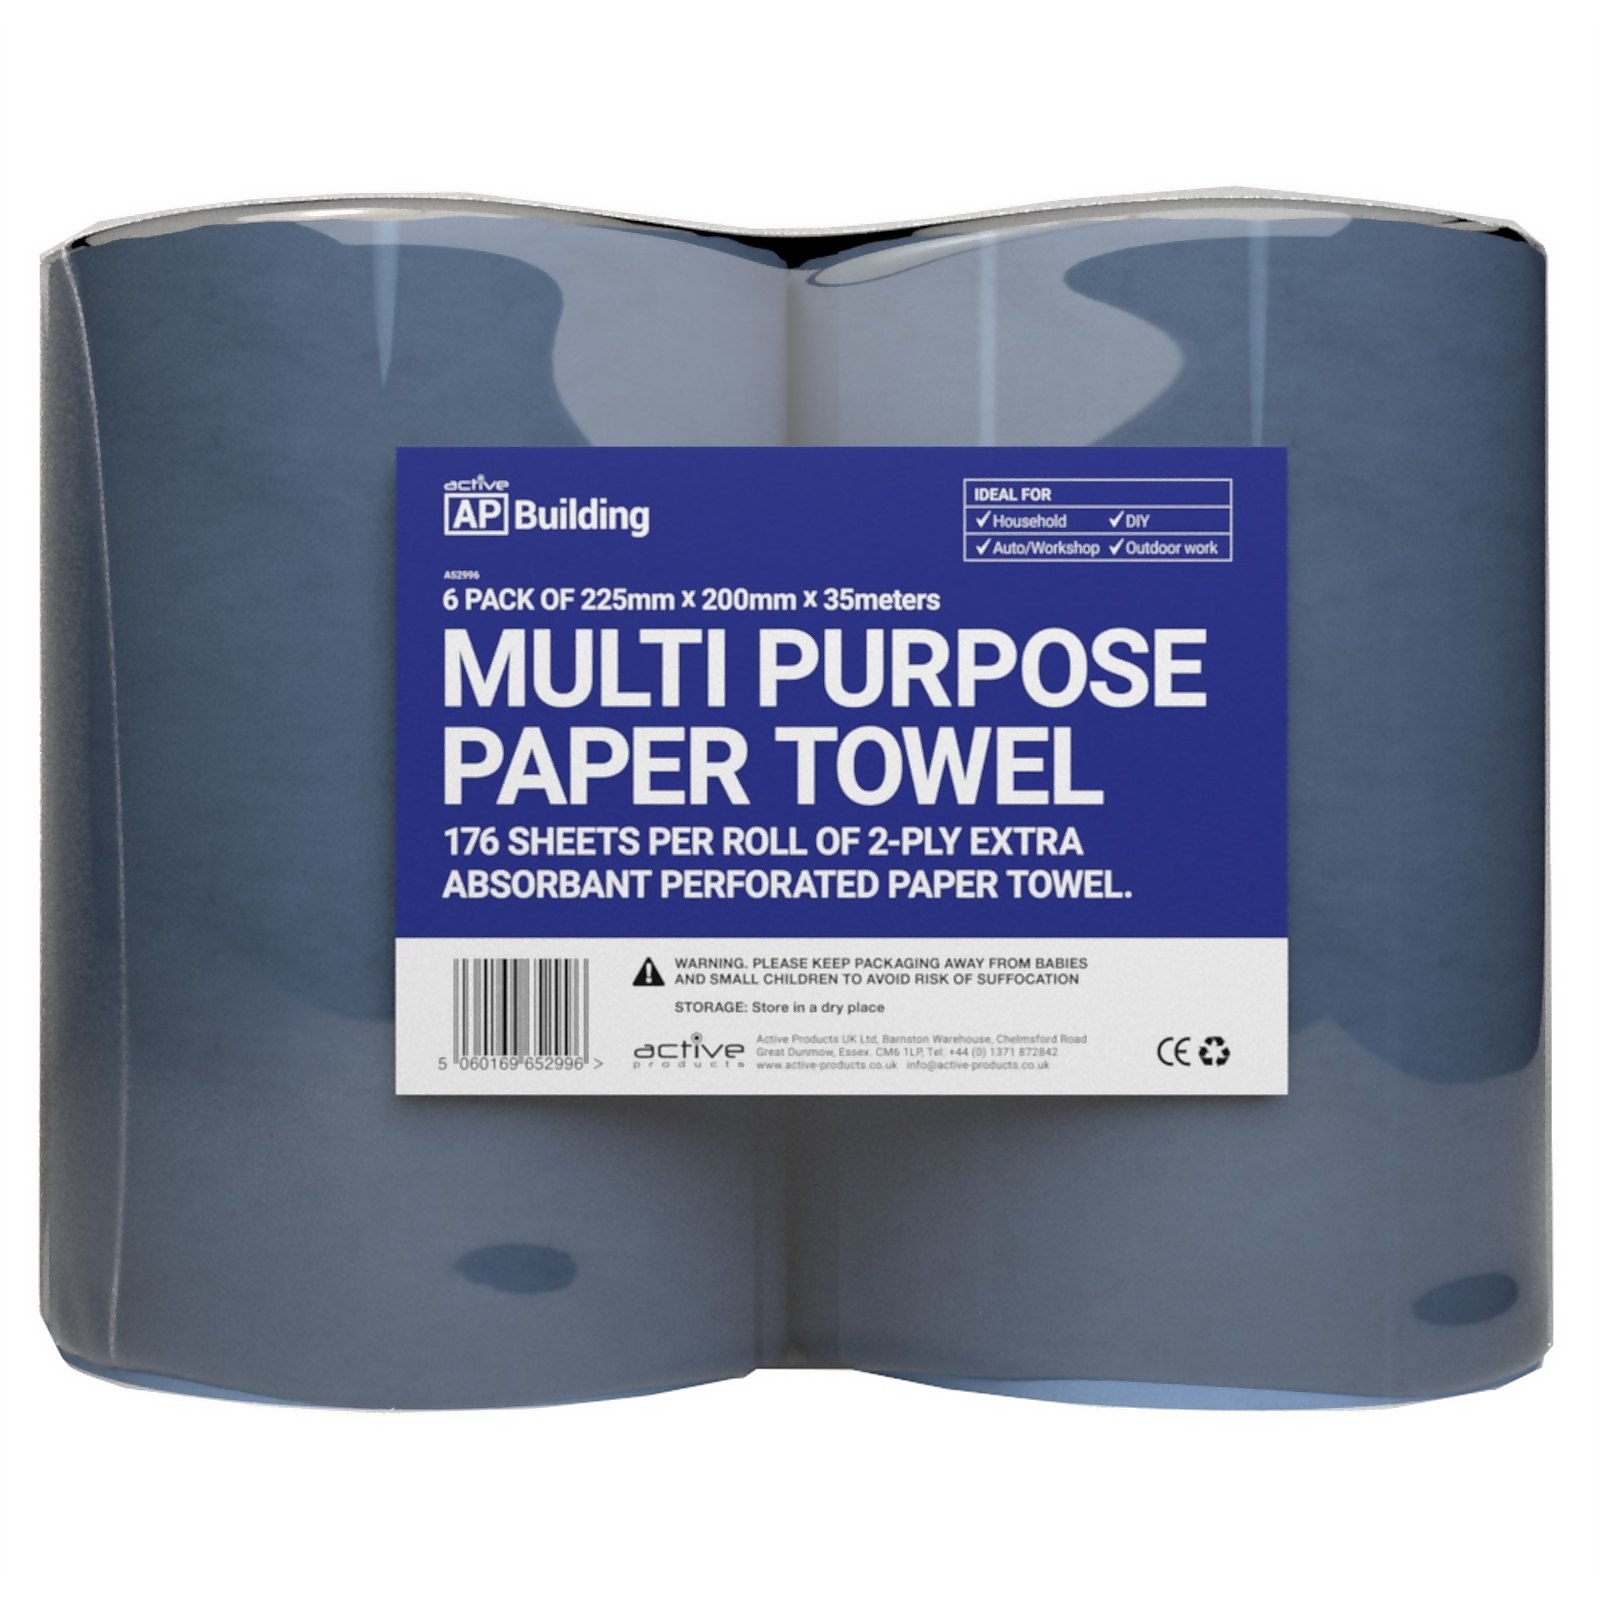 Photo of Active Product Multi Purpose Paper Towel - 6 Pack